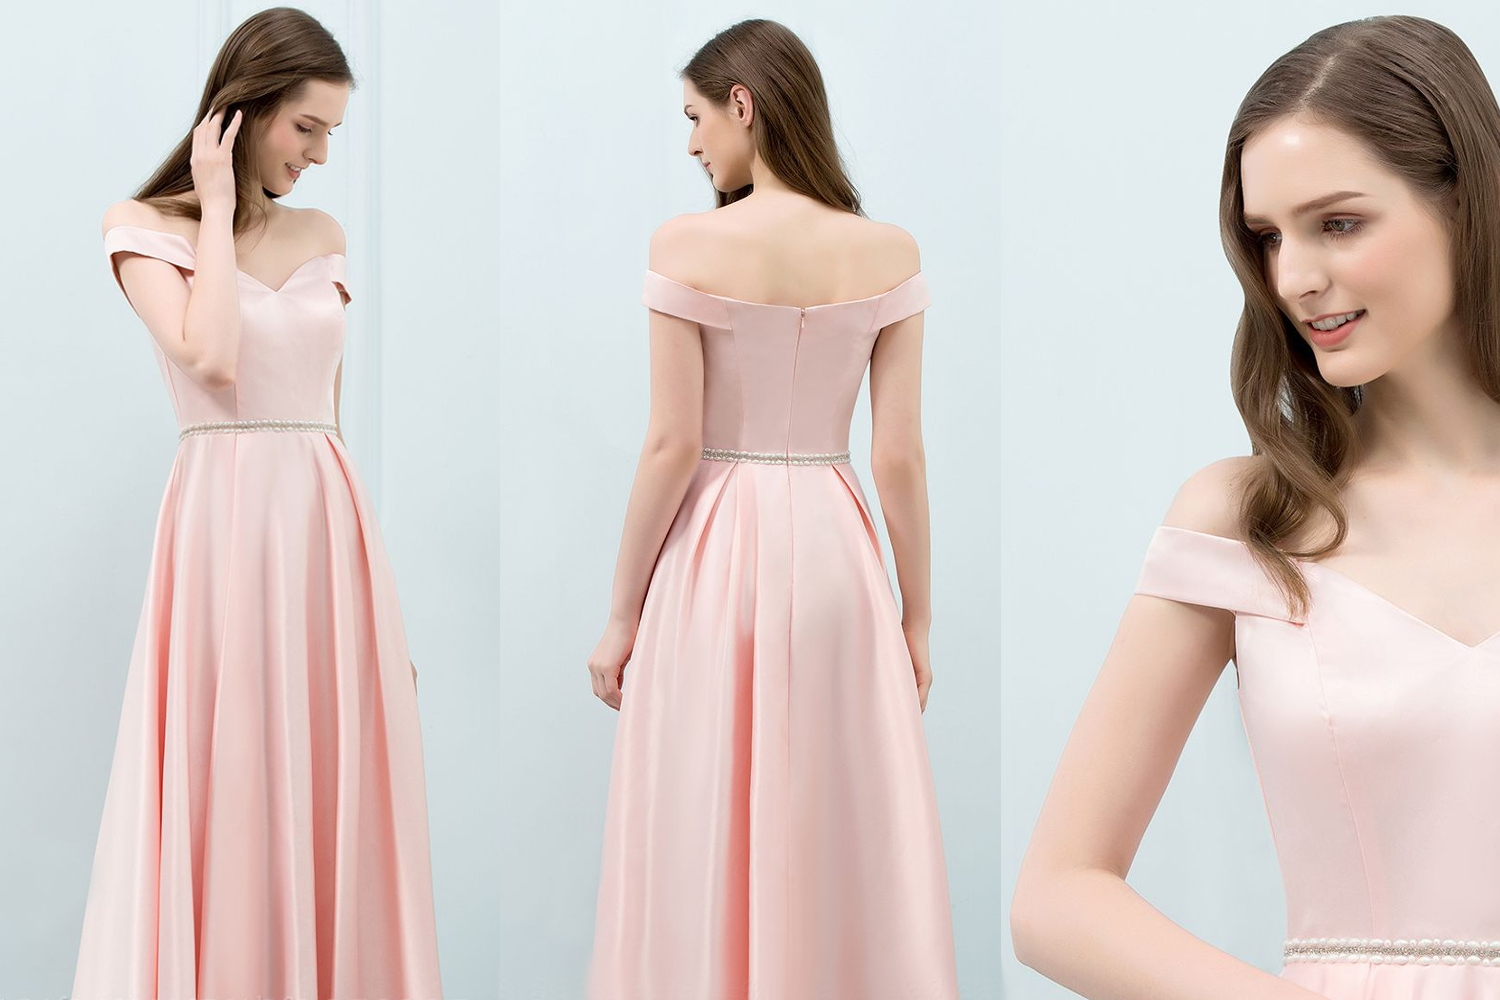 collagecollage with three pastel bridesmaids dresses for romantic wedding theme